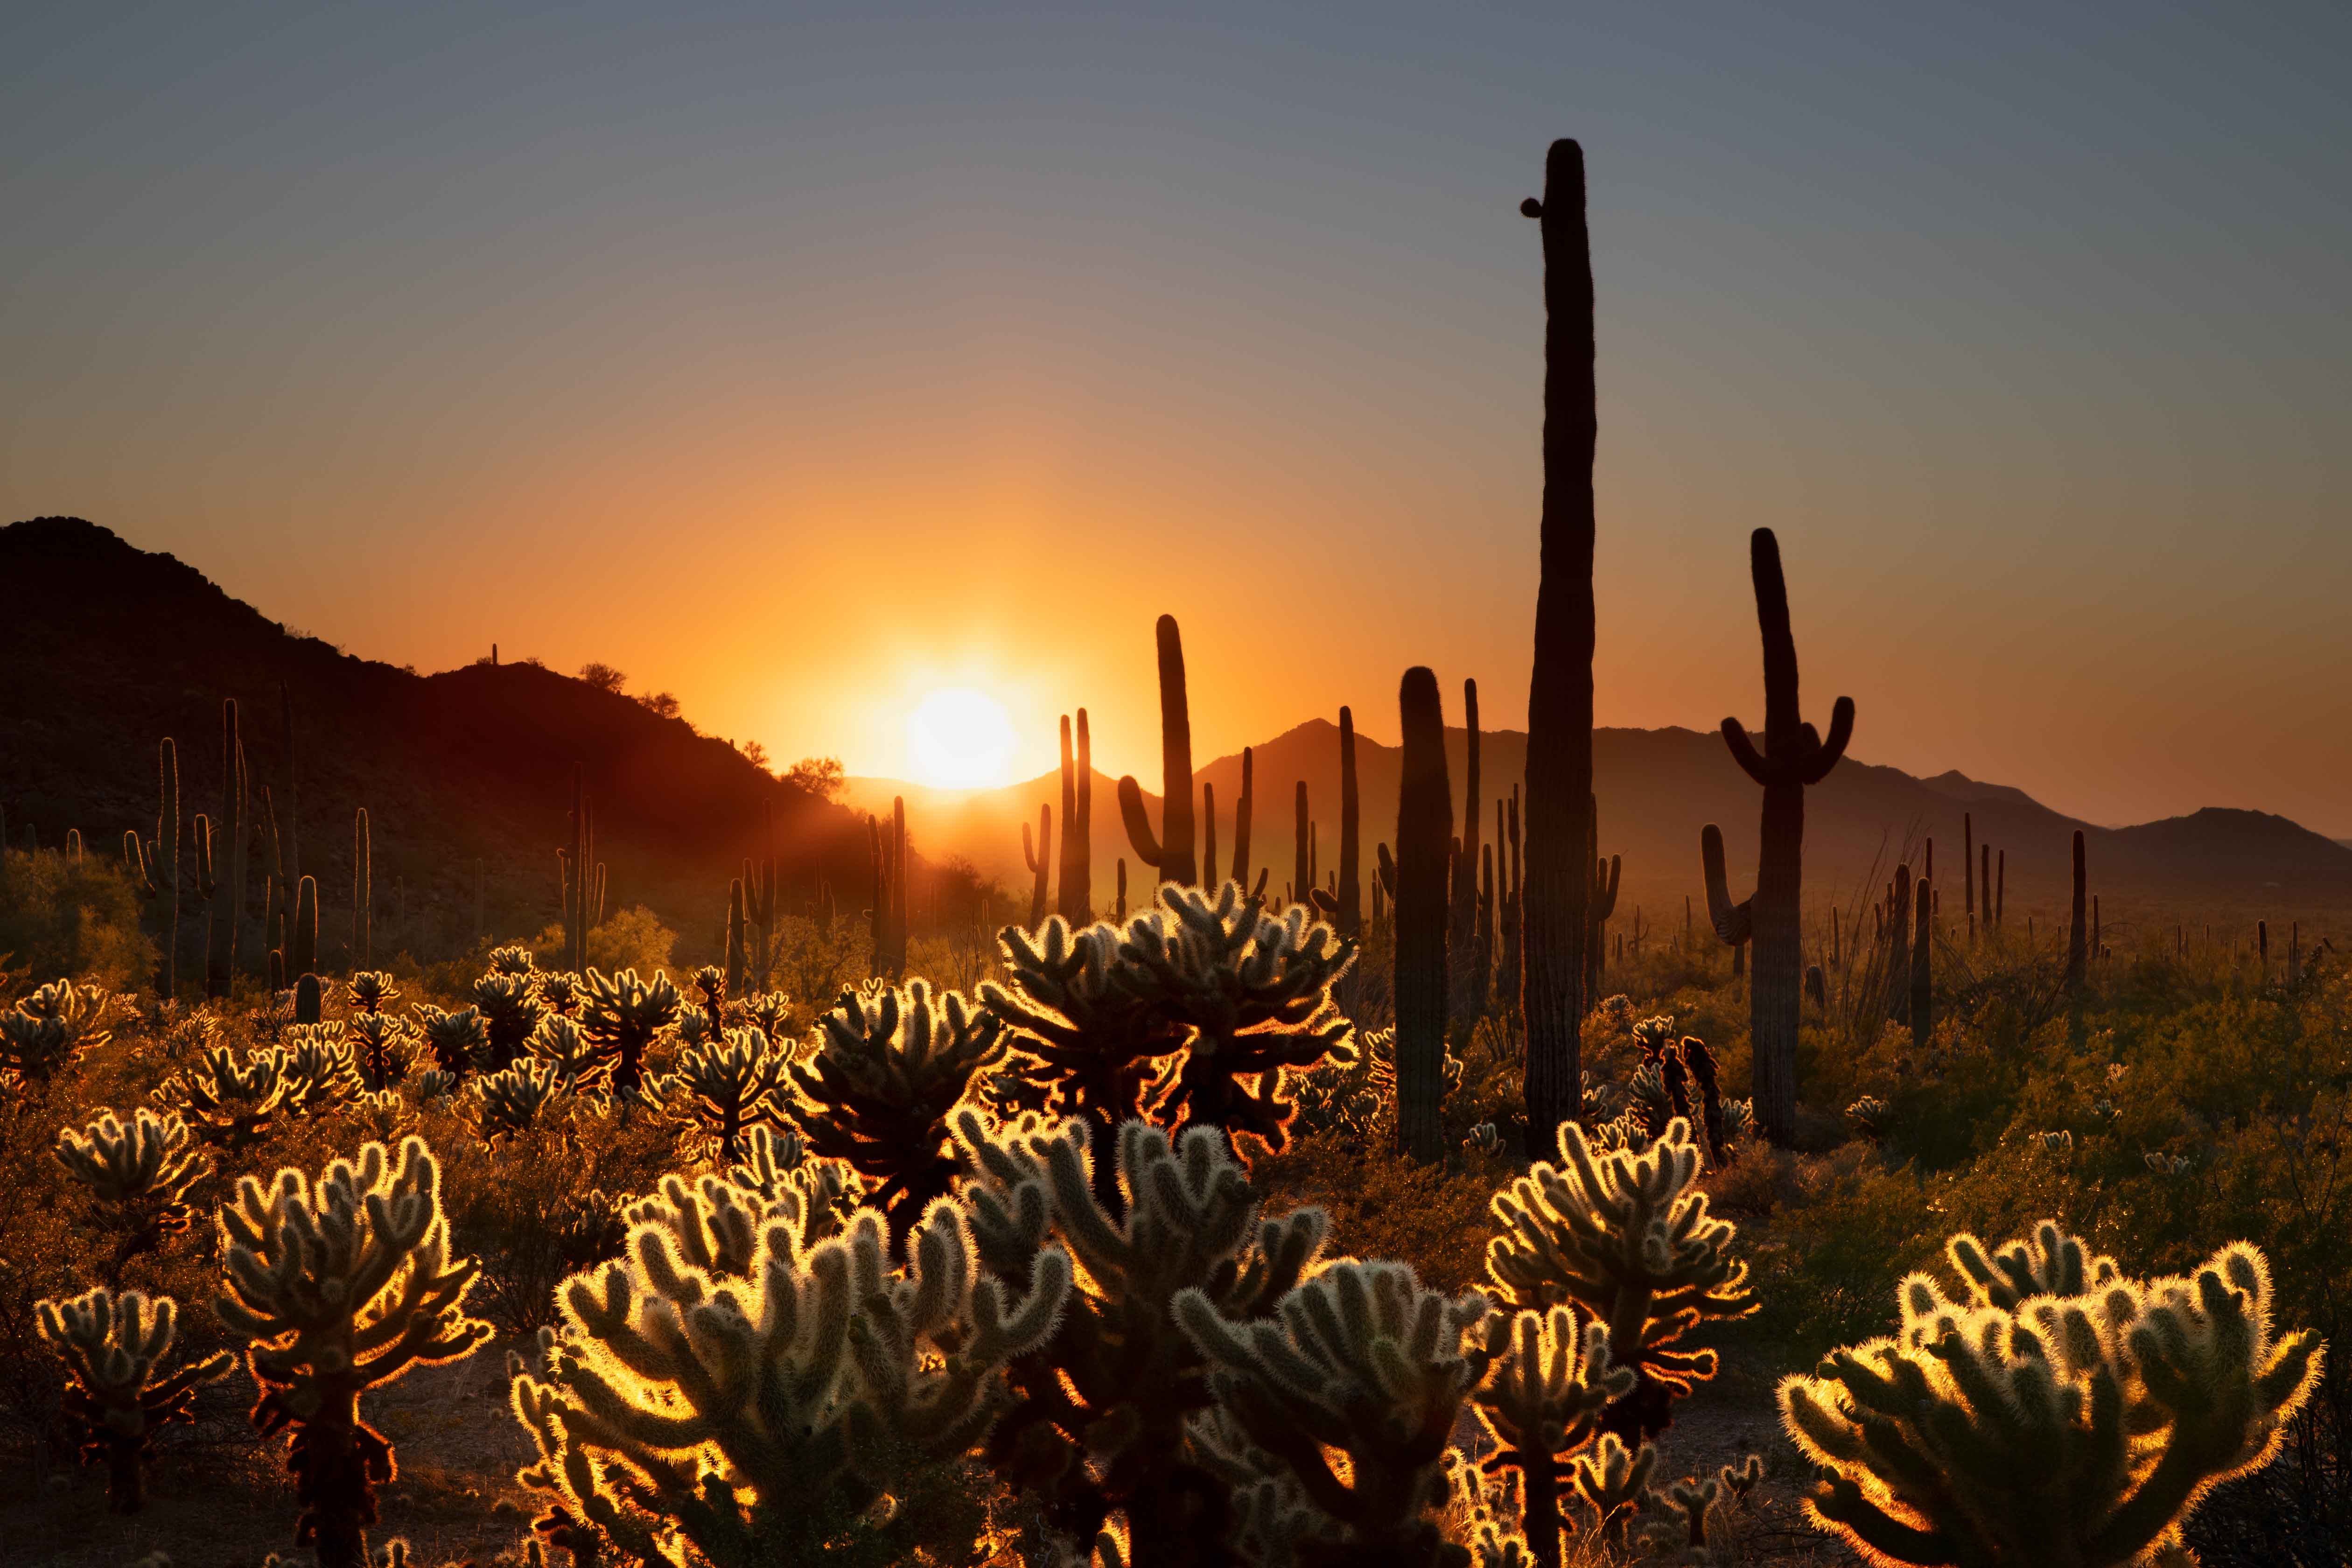 Cholla and saguaro cacti at sunset in the South Maricopa Mt. Wilderness at Sonoran Desert National Monument., Arizona.
